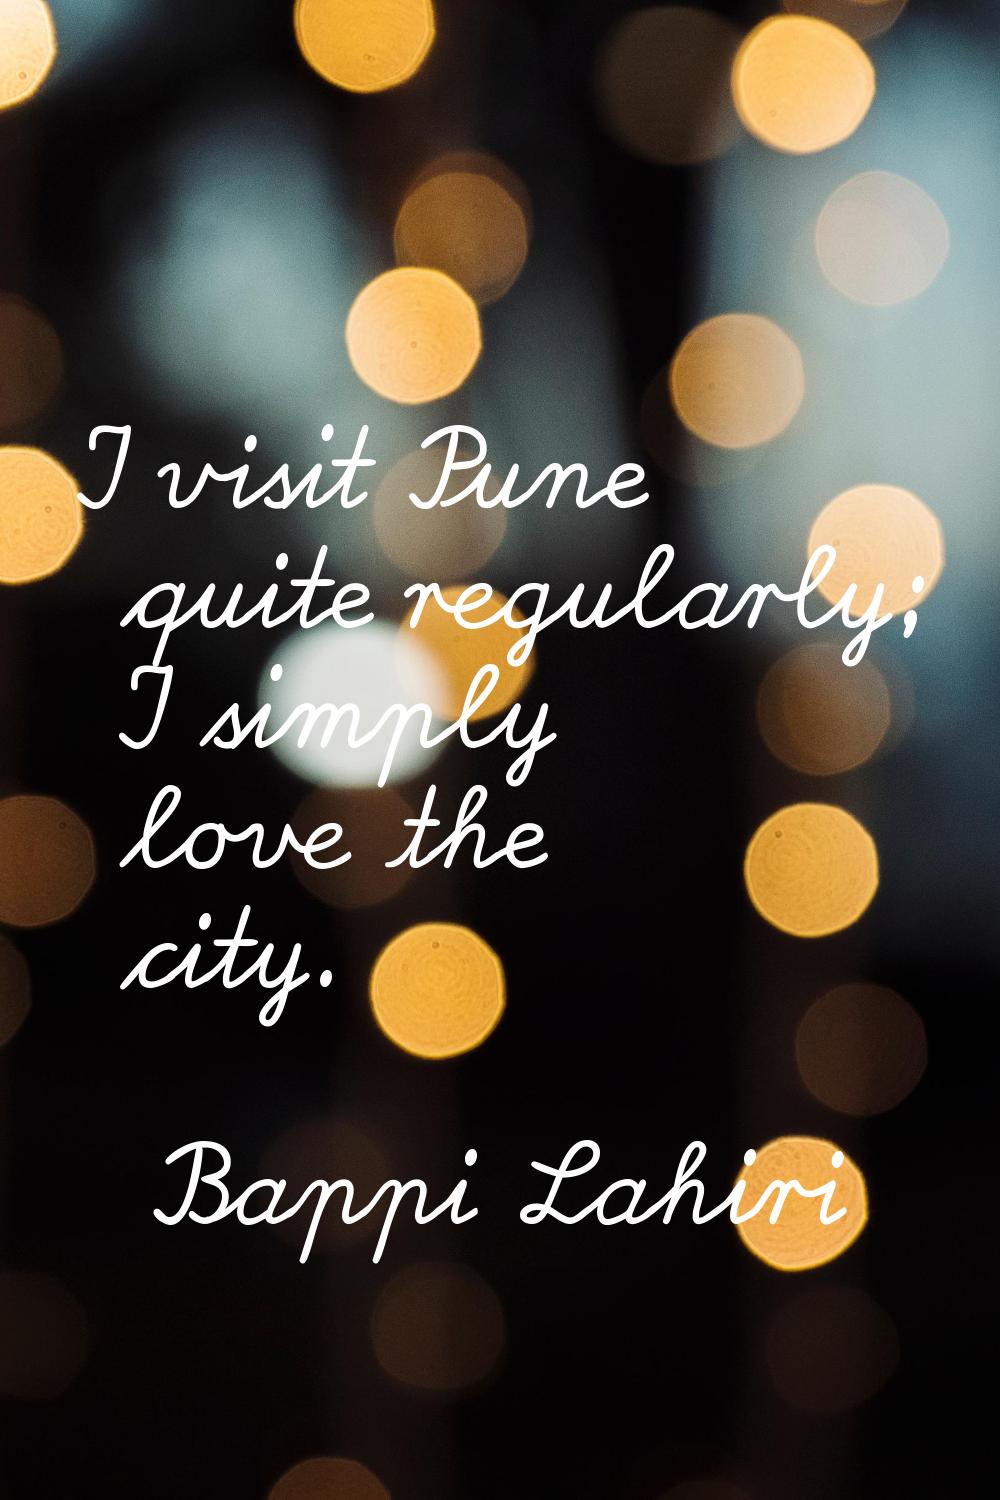 I visit Pune quite regularly; I simply love the city.